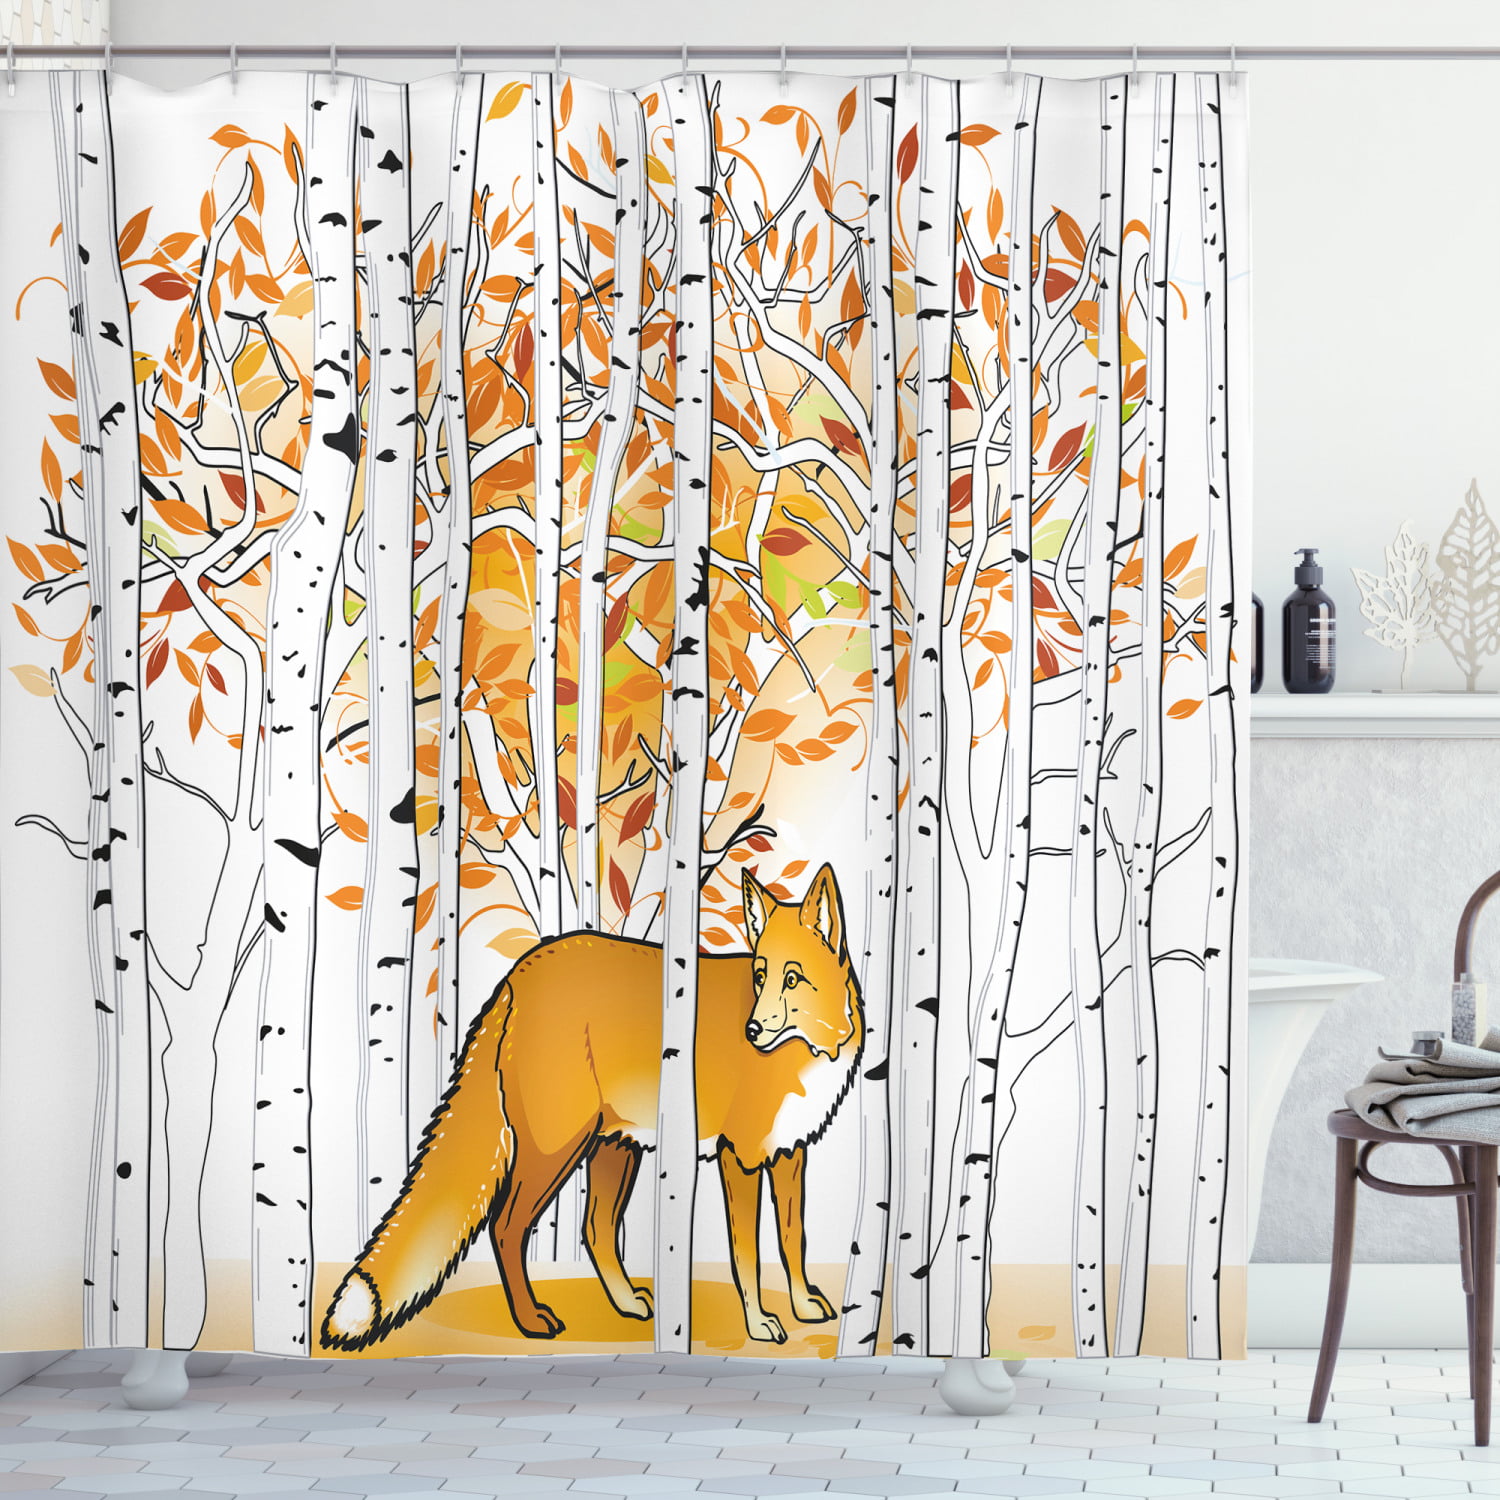 Whim-Wham Hipster Fashion Fox Shower Curtain Animals Fox Teacher Cartoon Colorful Spectacles Eyeglasses Waterproof Shower Curtain Set with 12 Hooks.